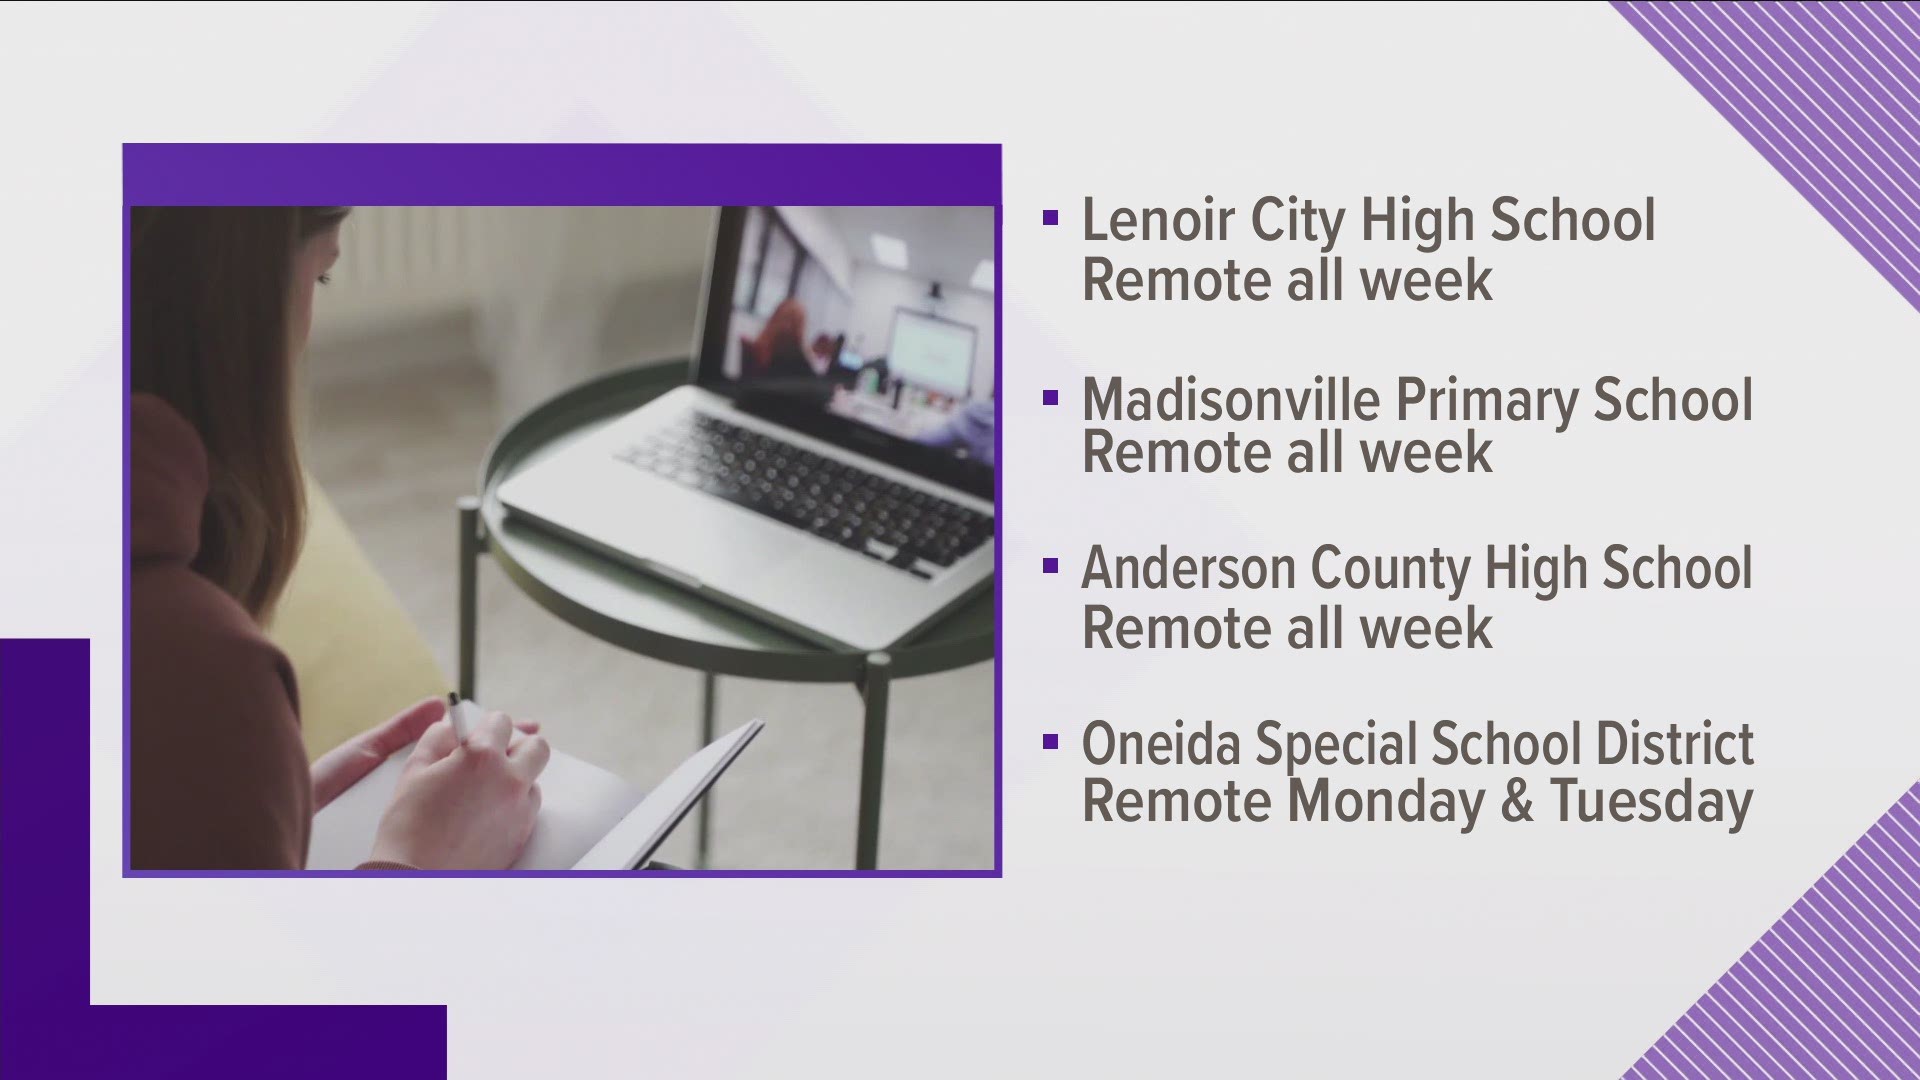 Several schools across East Tennessee are moving to virtual learning for the week after Thanksgiving break.